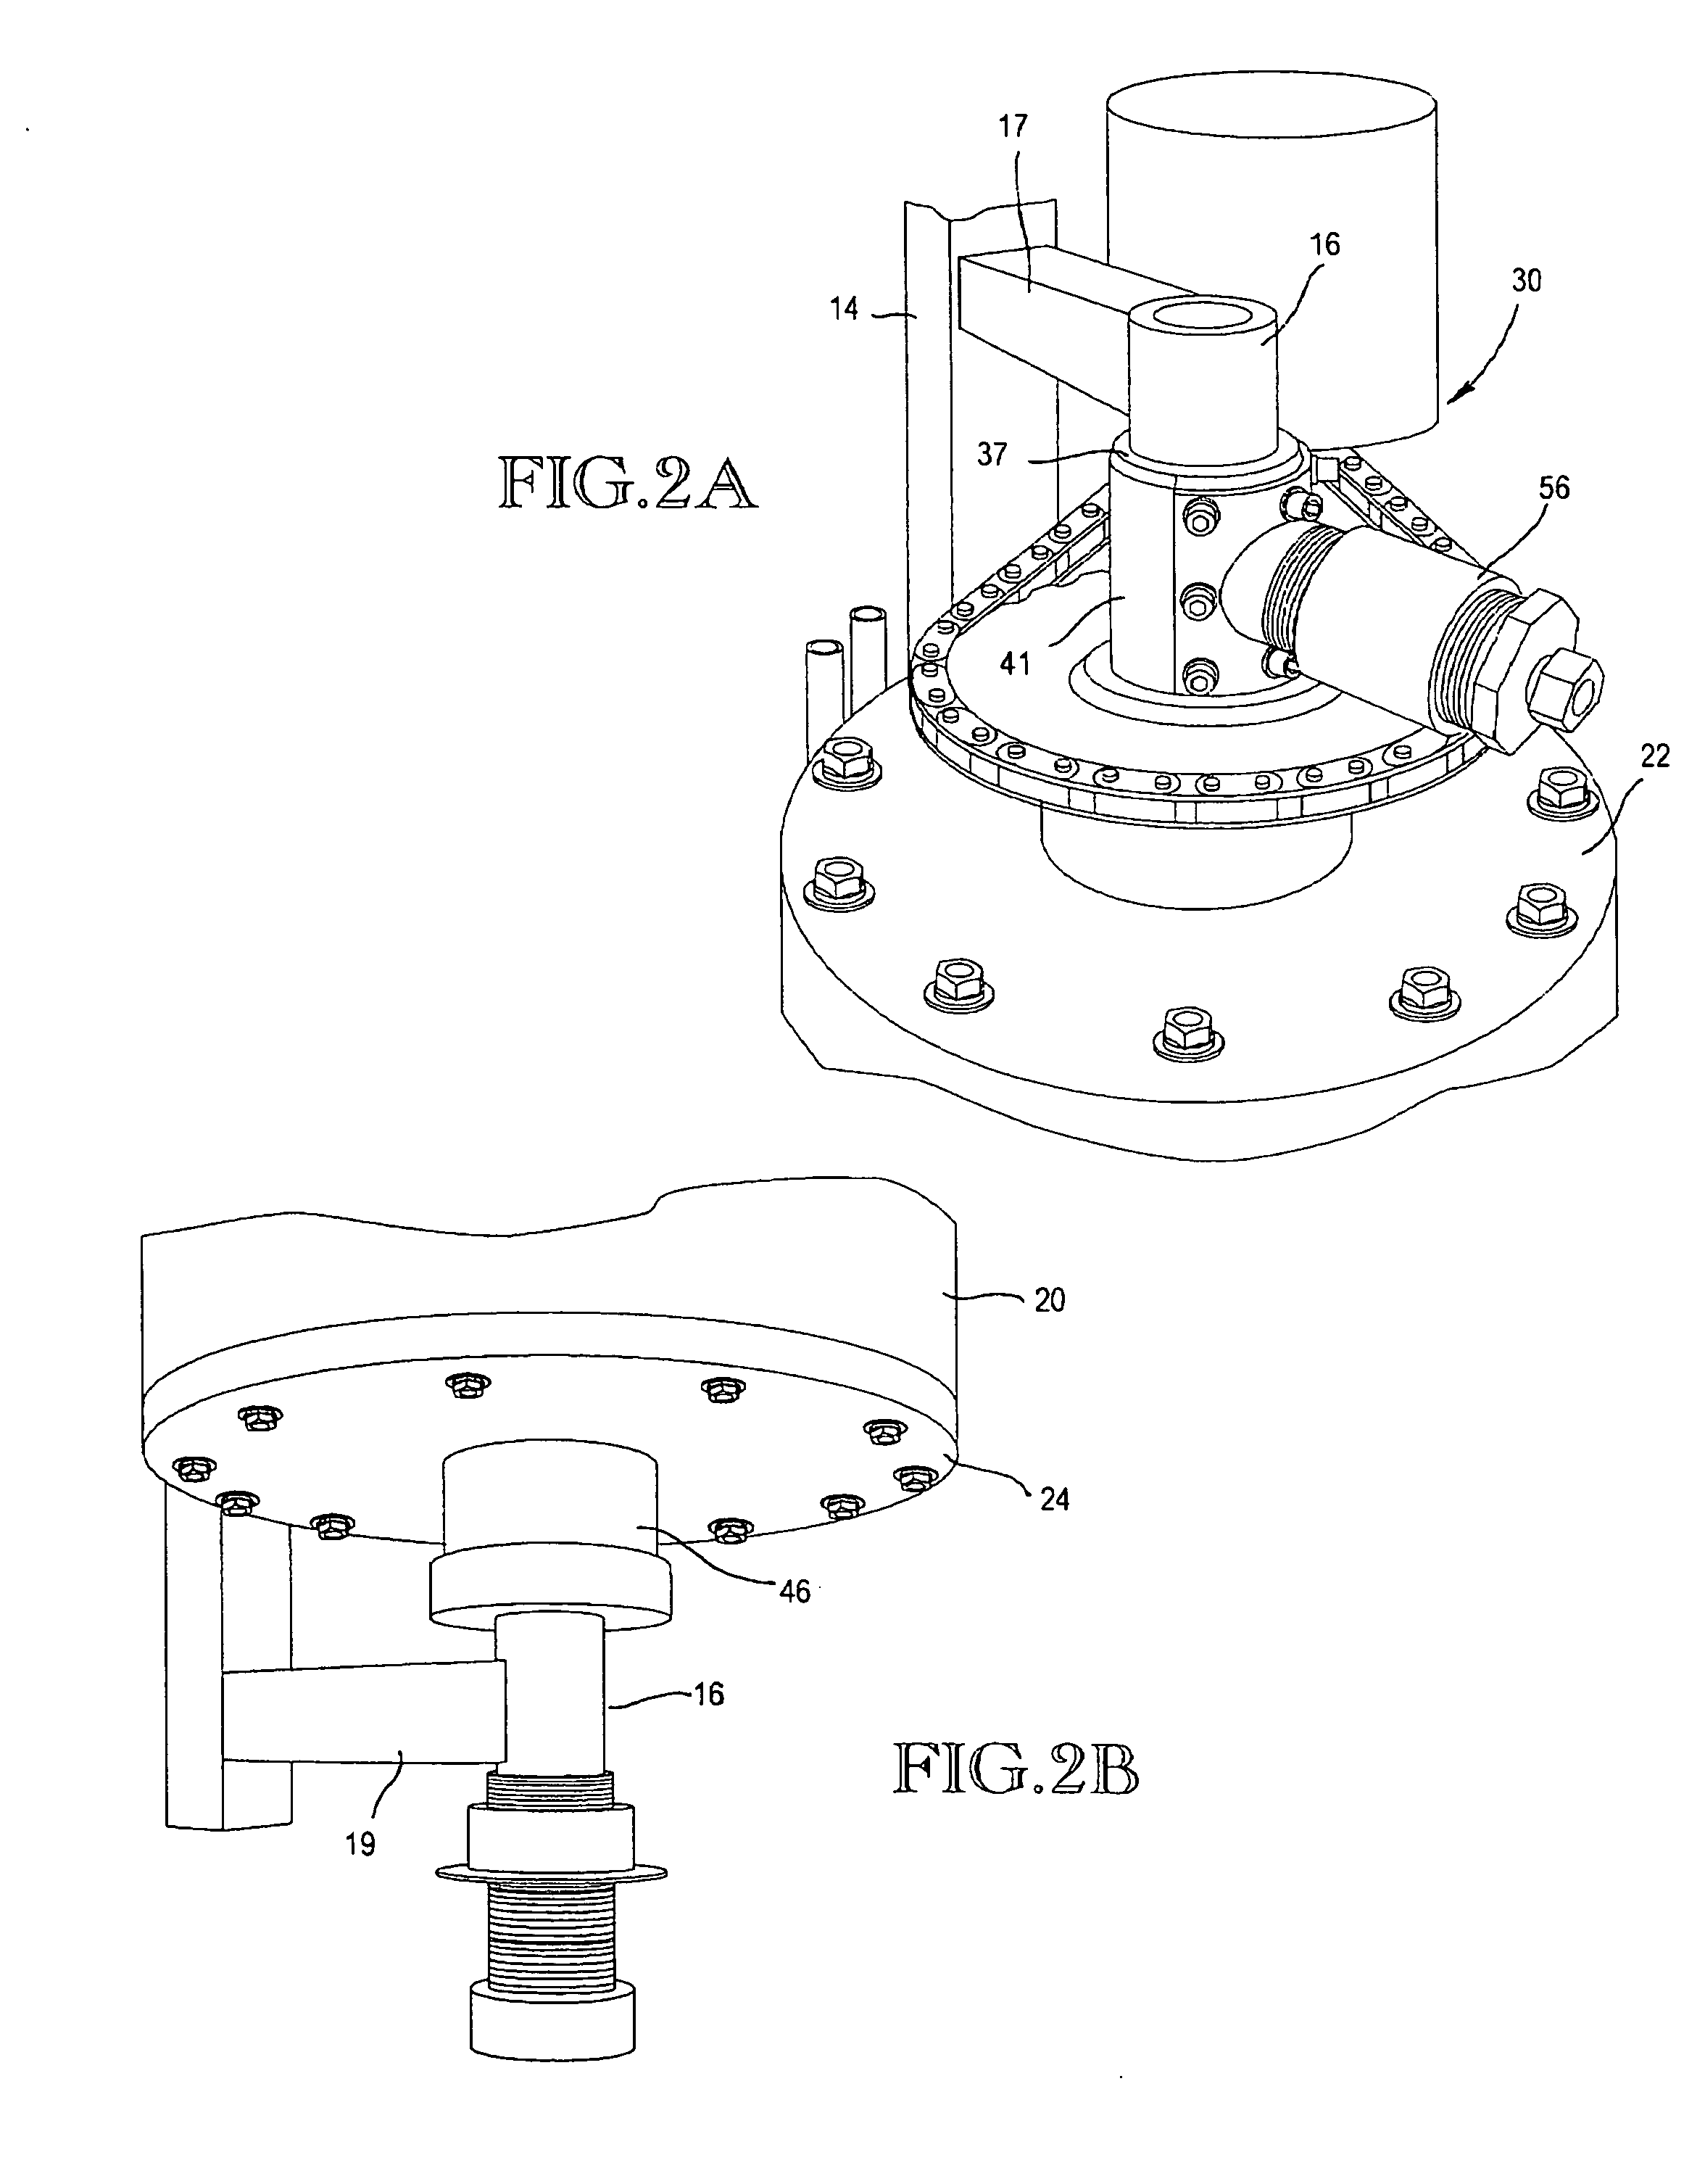 Self-cleaning, continuously operating filter apparatus for fluids